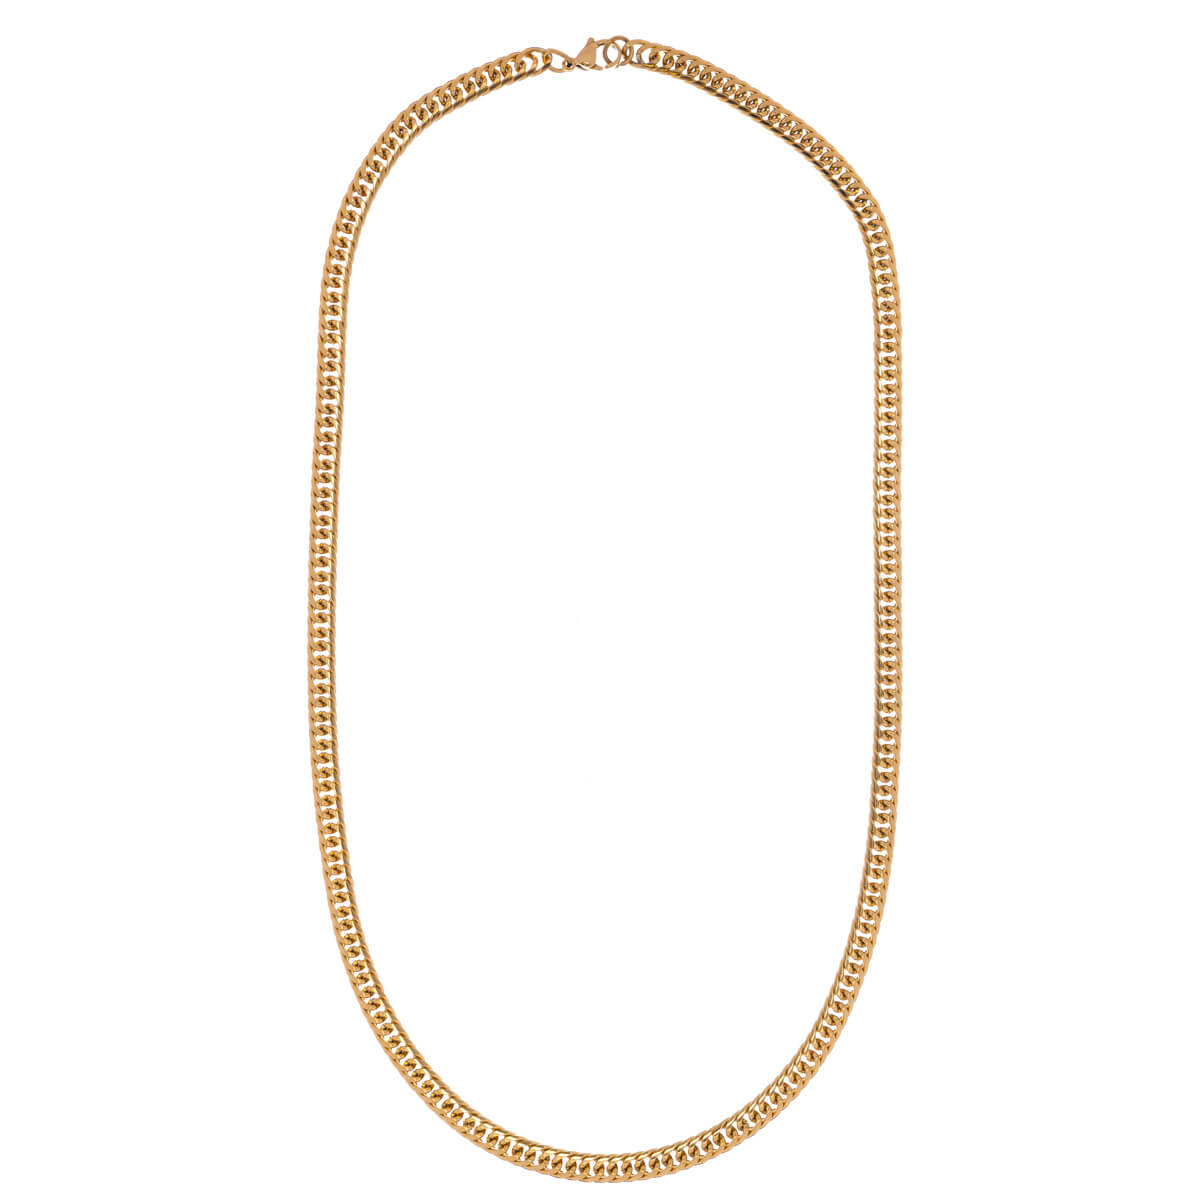 Rounded armoured chain necklace 50cm (steel 316L)